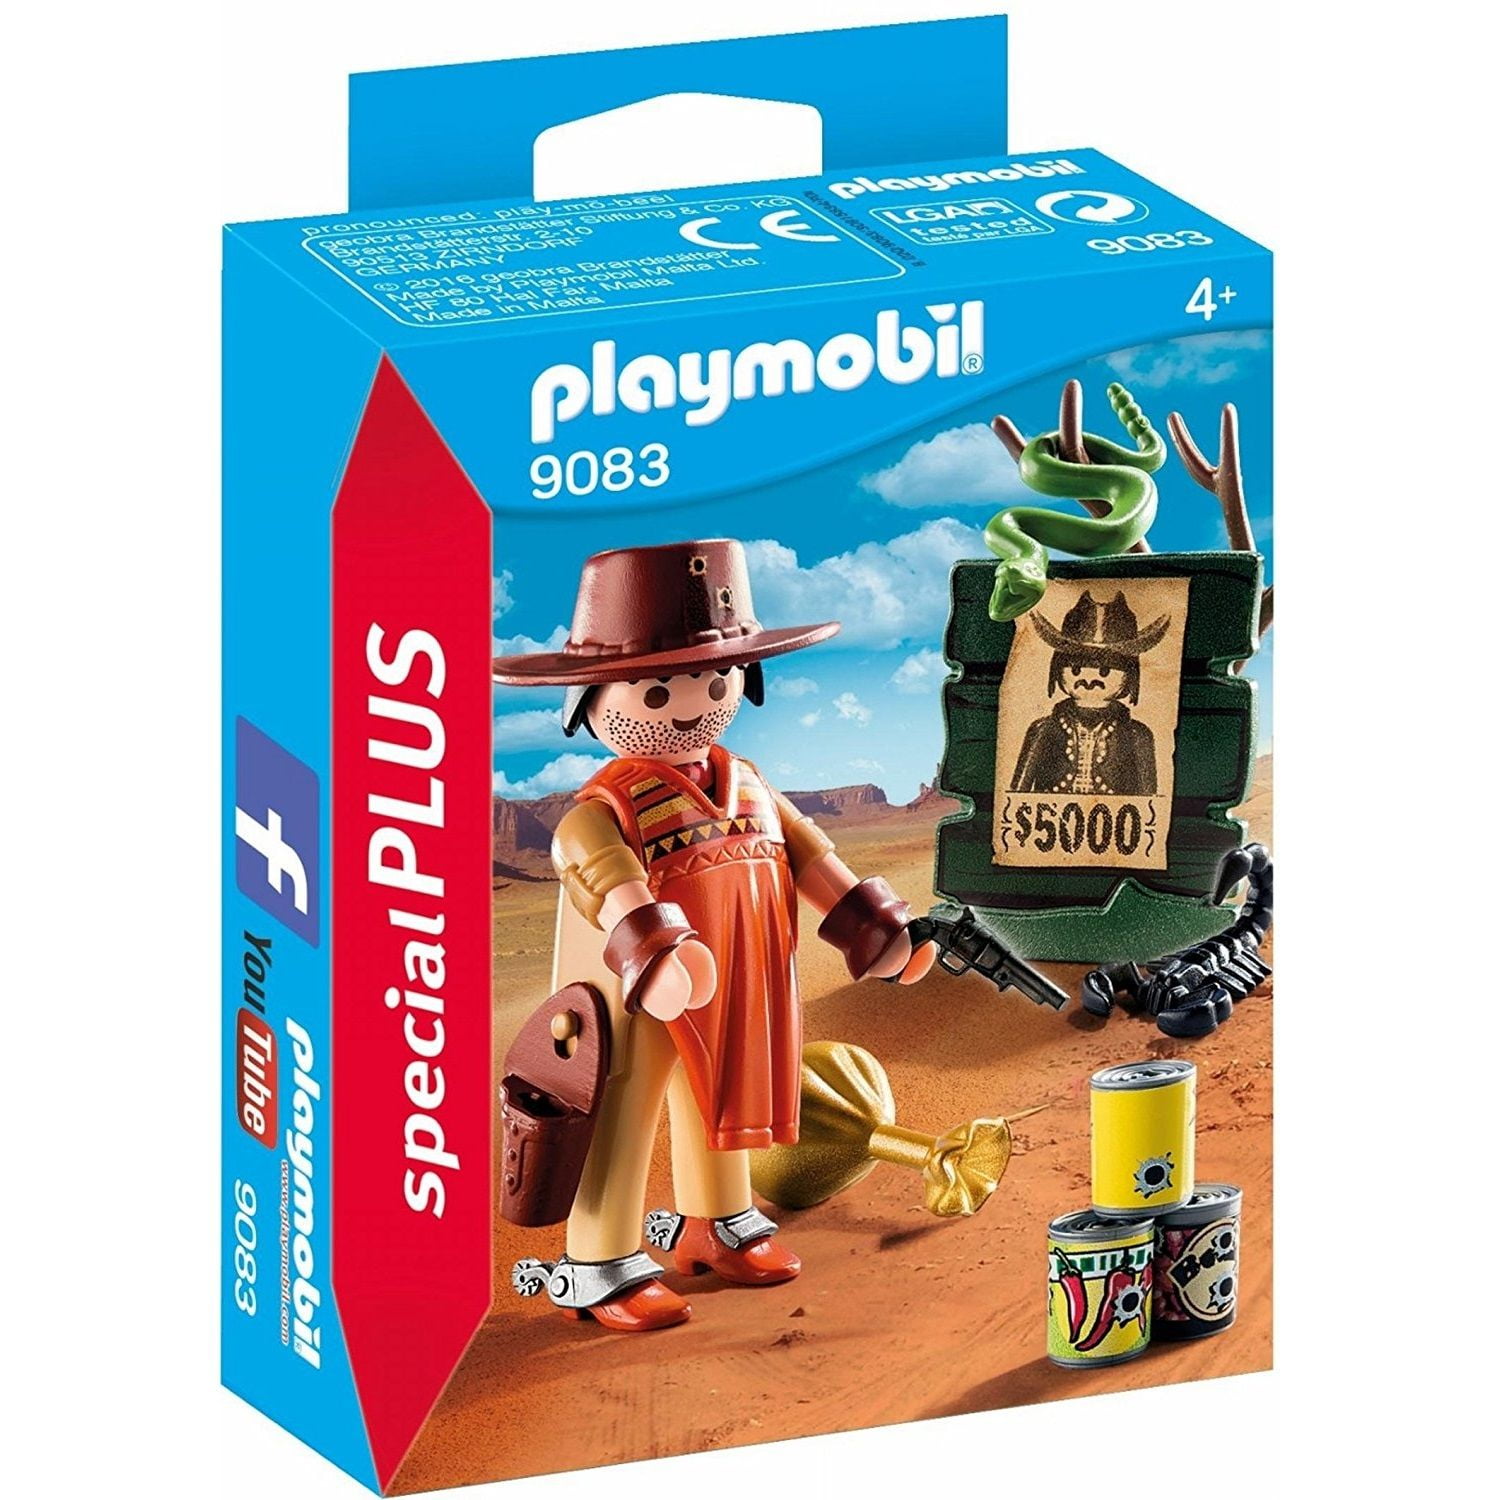 bue besked religion Cowboy with Wanted Poster Special Plus - Play Set by Playmobil (9083) -  Walmart.com